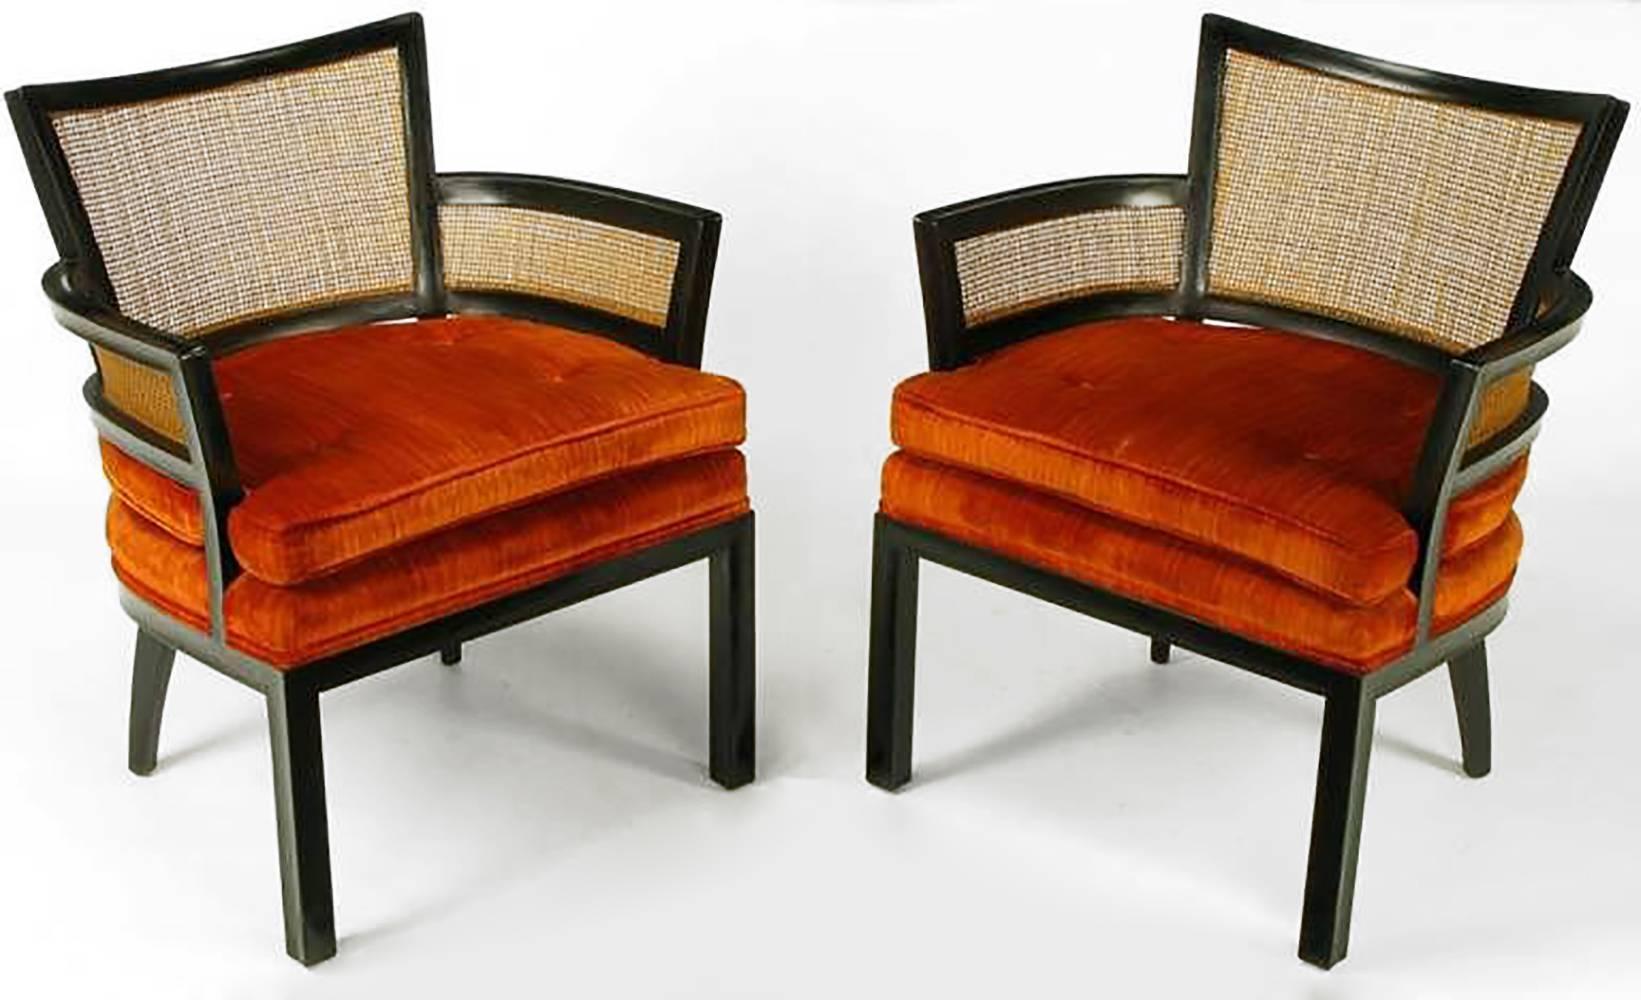 Pair of ebonized mahogany and cane arm chairs by Baker Furniture. Stacked and loose seat cushion is upholstered in a button tufted persimmon velvet. Most likely a Michael Taylor or Winsor White design.